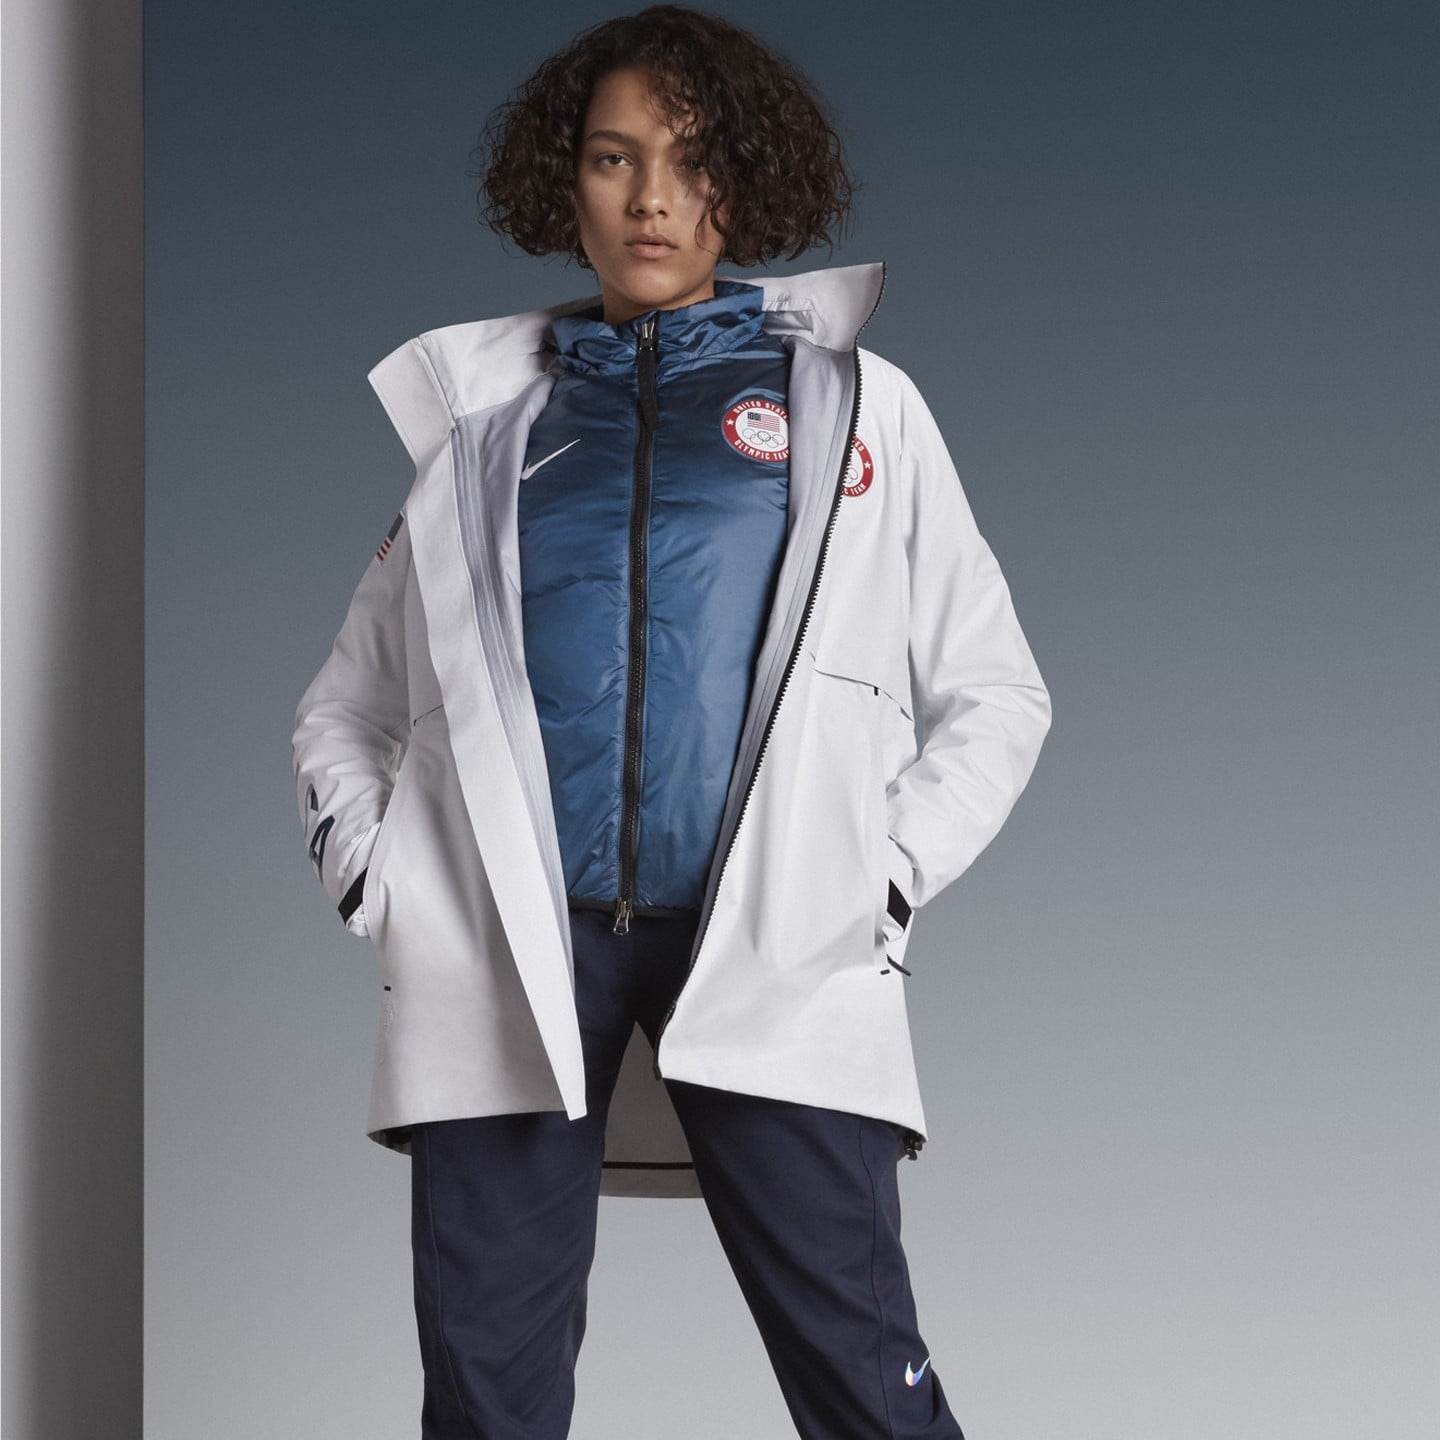 Nike Winter Olympics Team Collection | POPSUGAR Fitness